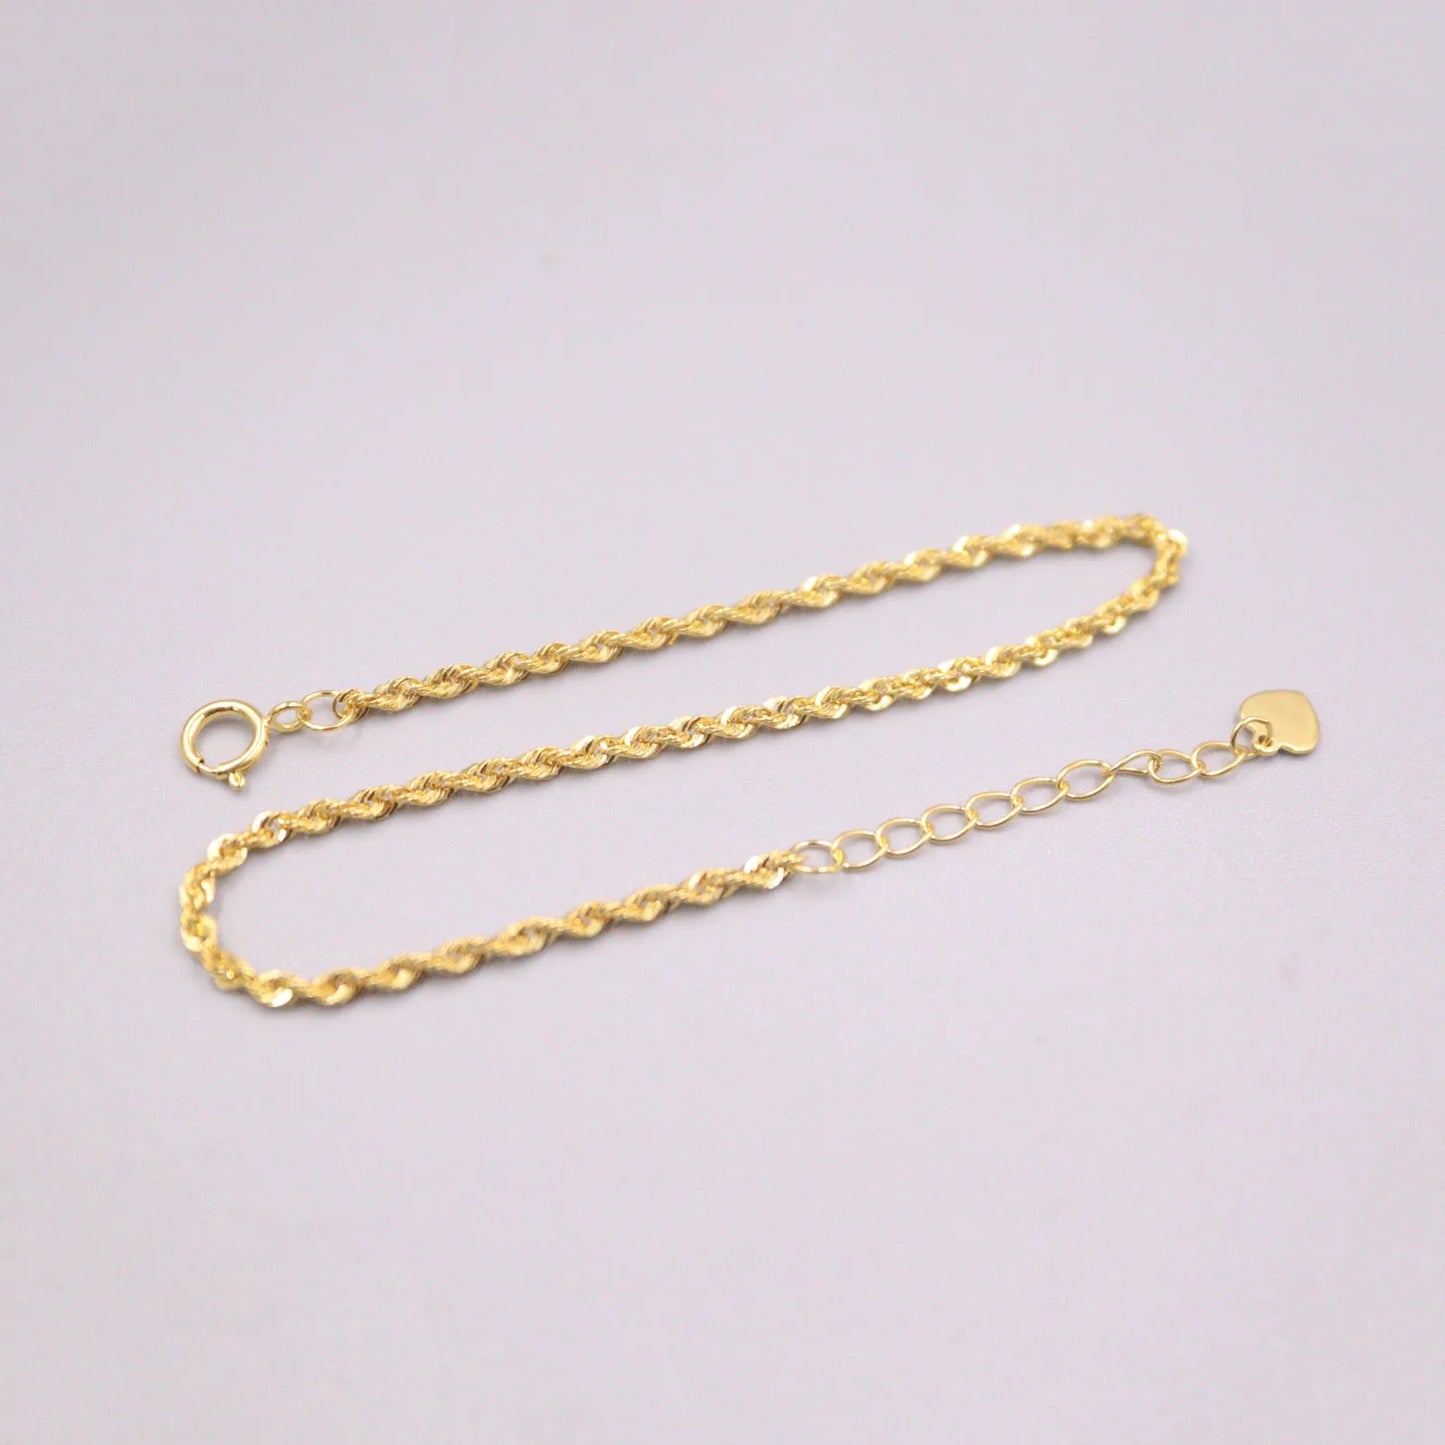 Au750 Real 18K Yellow Gold Bracelet For Women 1.8mm Twist Rope Link Chain 18cm Extender